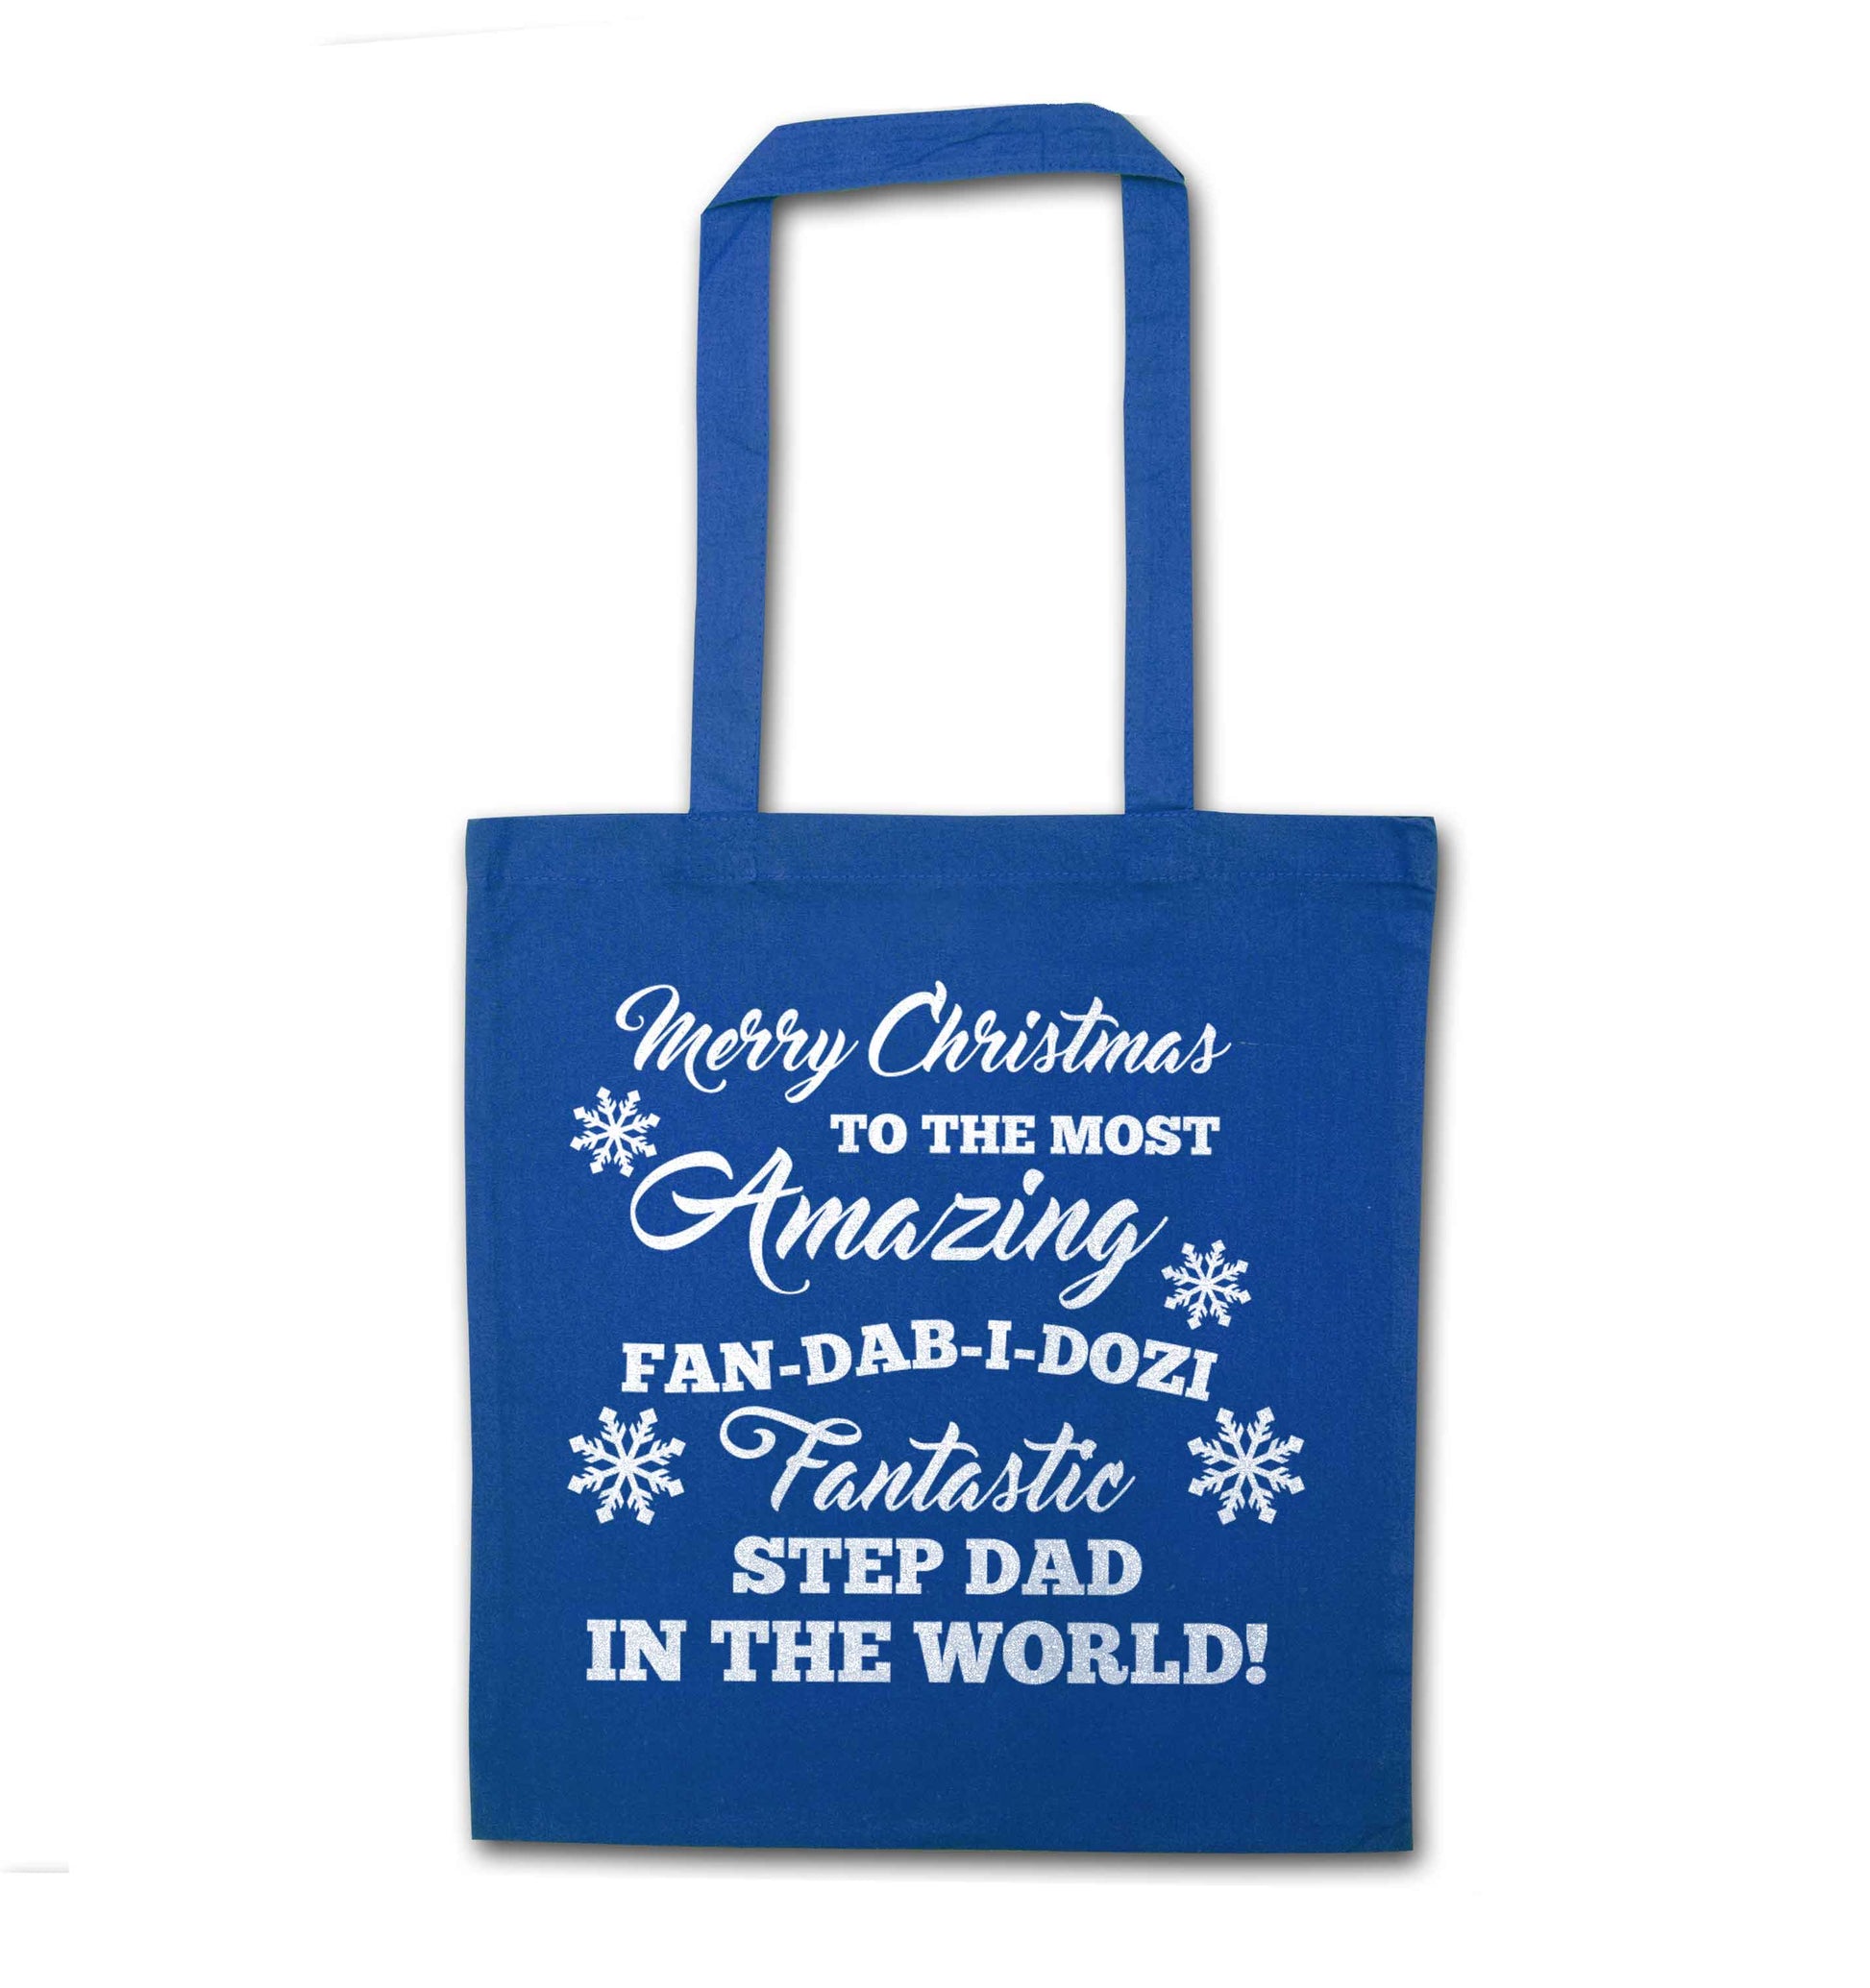 Merry Christmas to the most amazing fan-dab-i-dozi fantasic Step Dad in the world blue tote bag